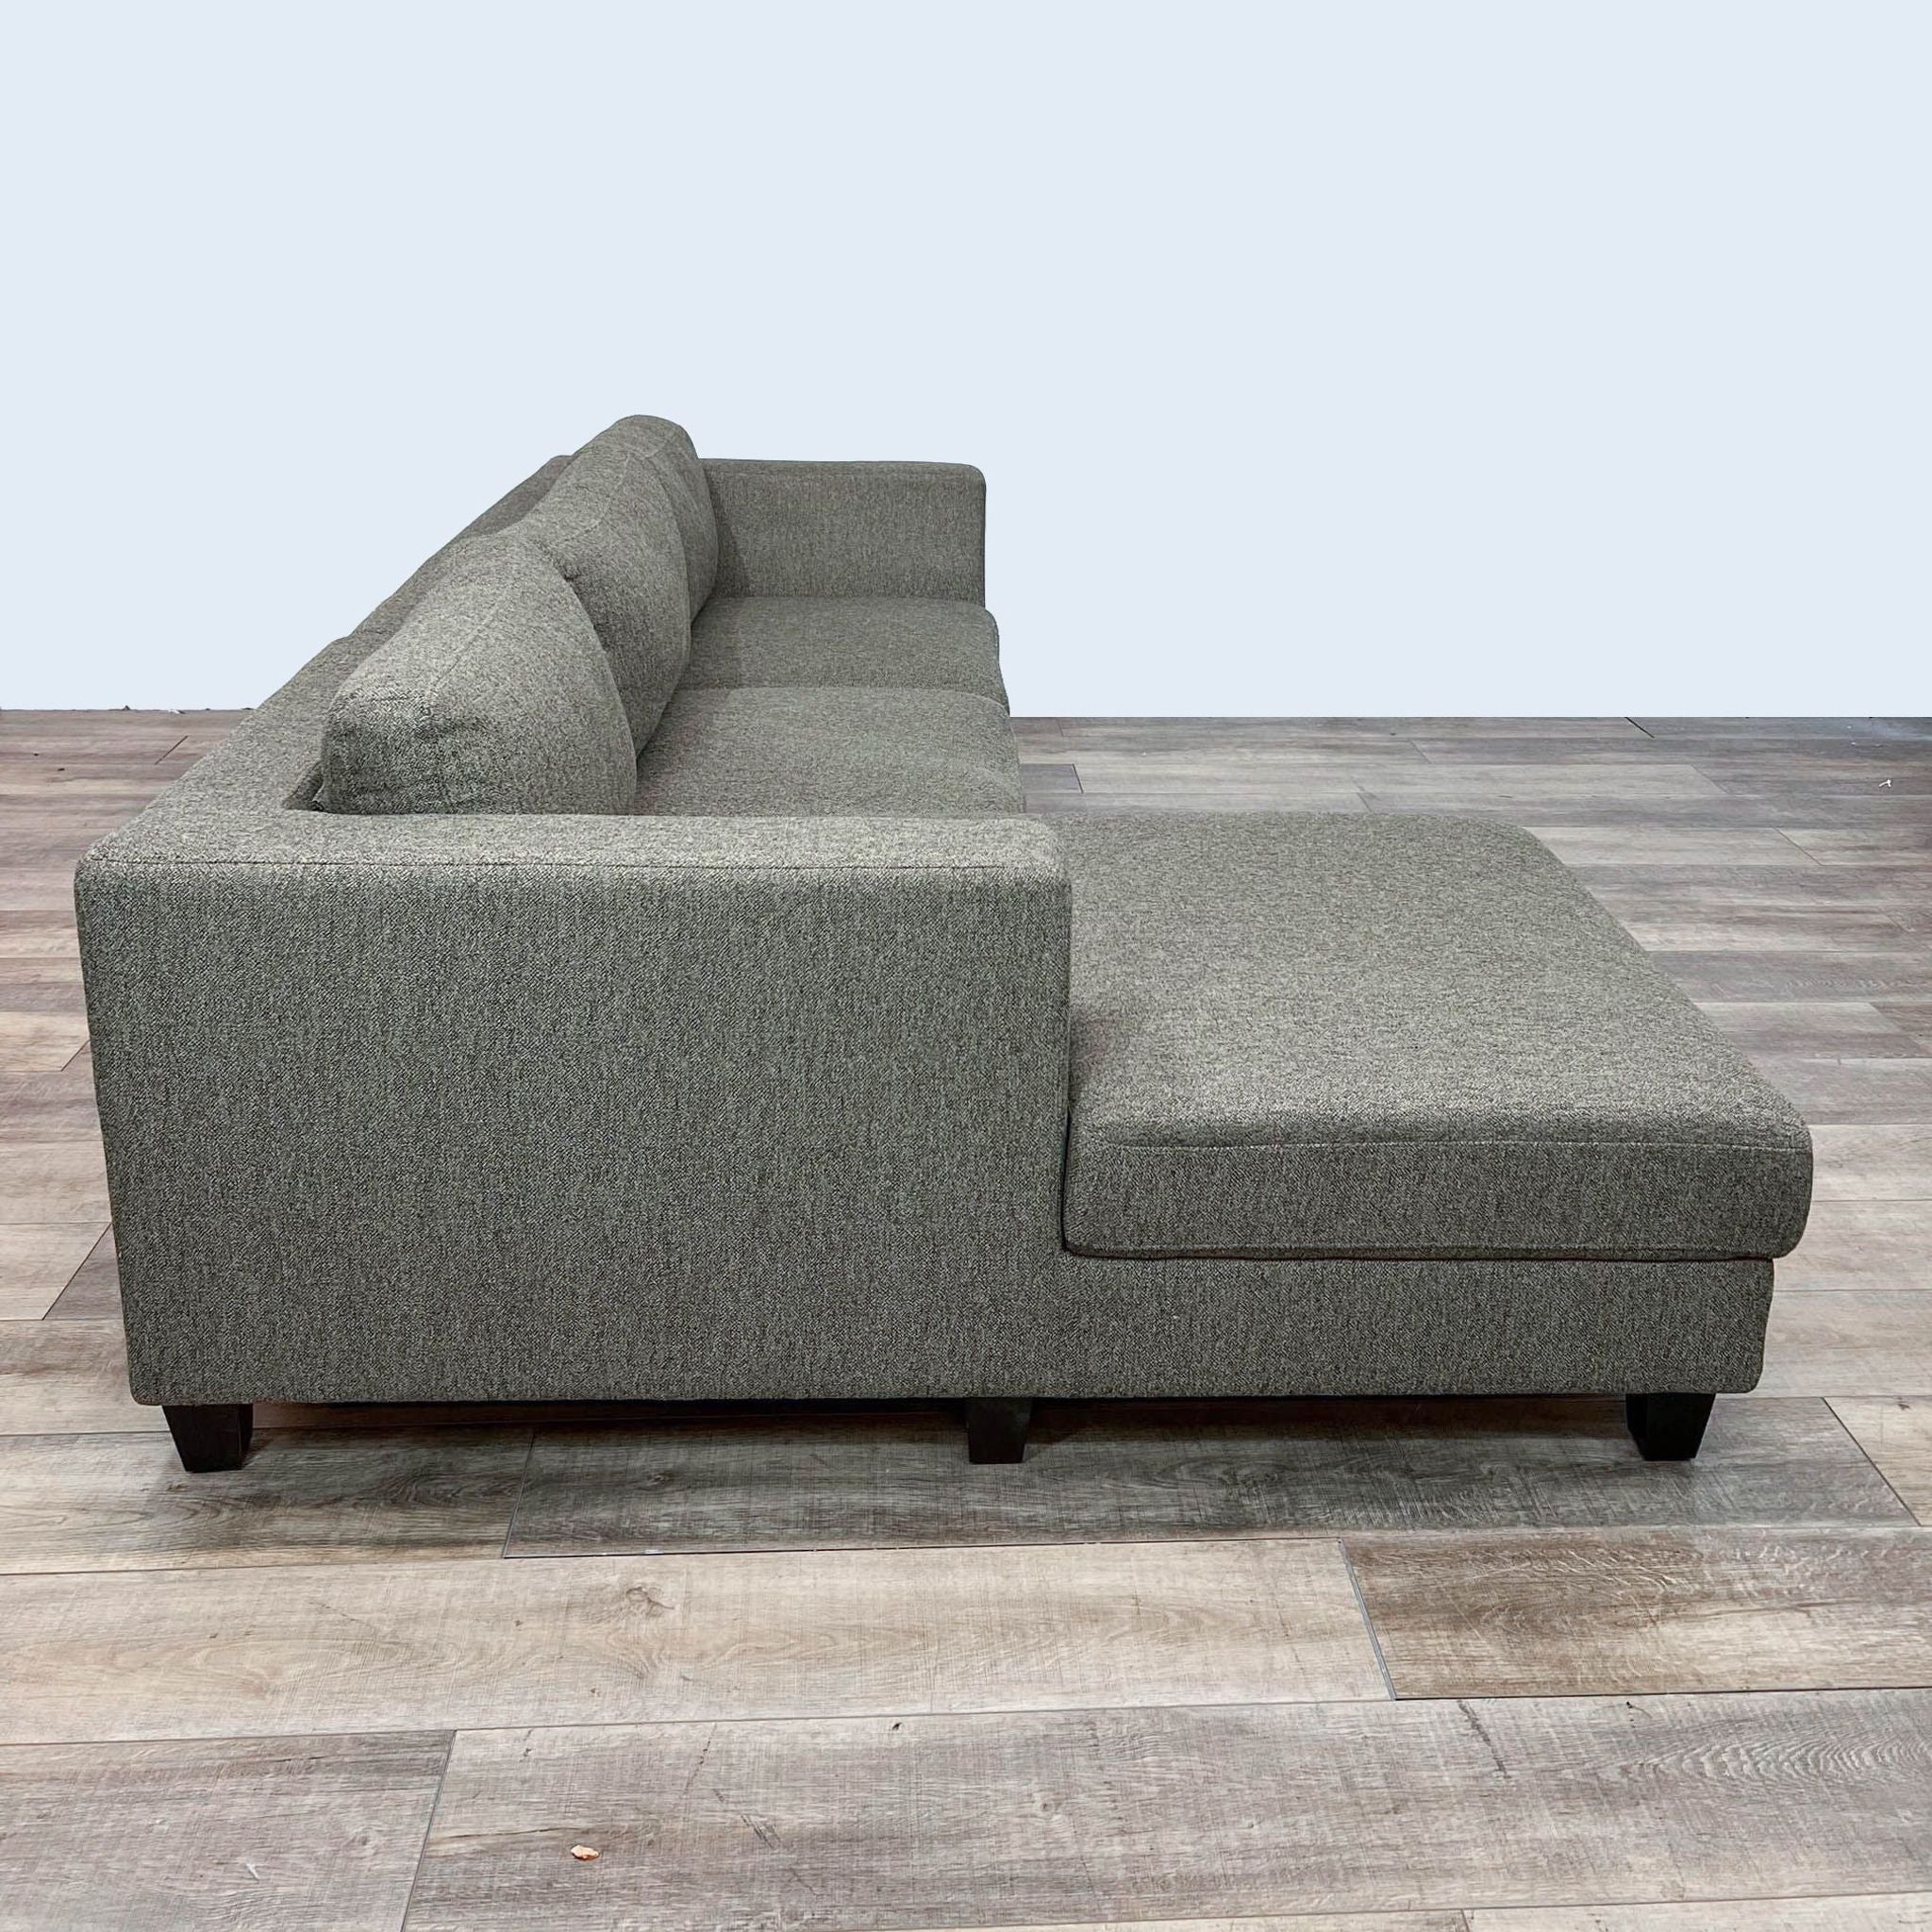 Reperch contemporary sectional sofa with clean lines and dark wooden feet on a wooden floor.